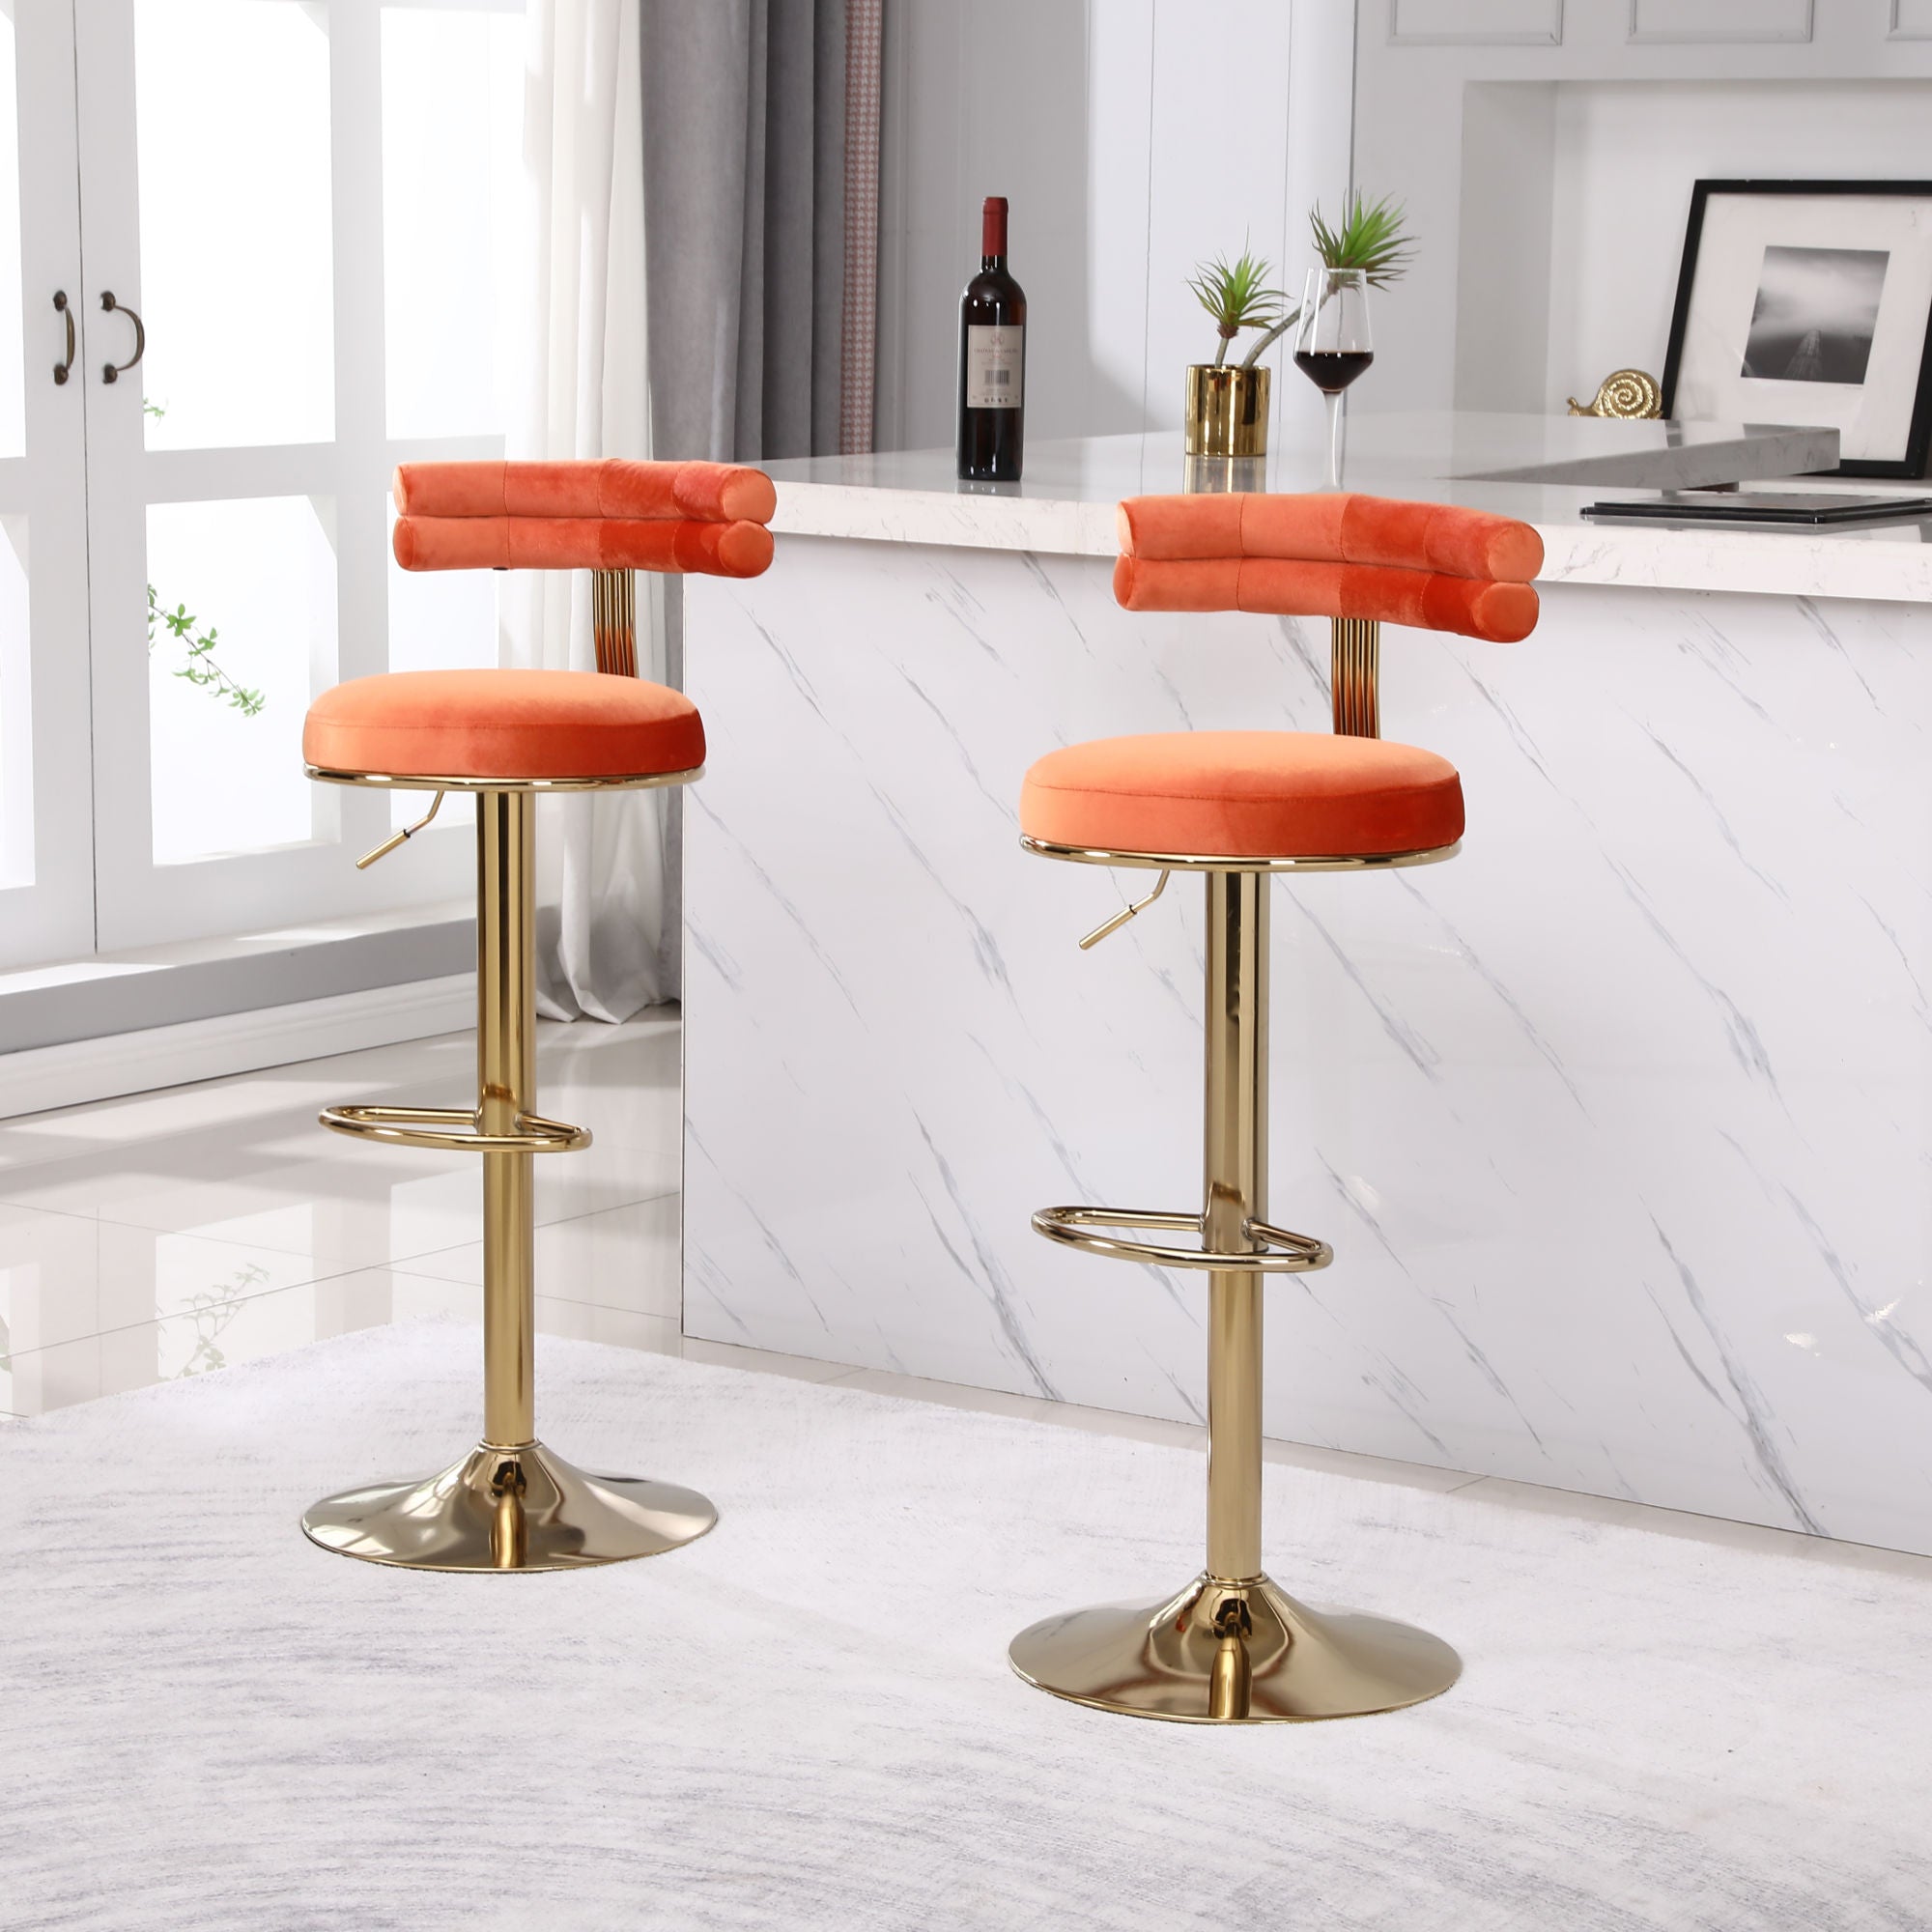 Set of 2 gold chair